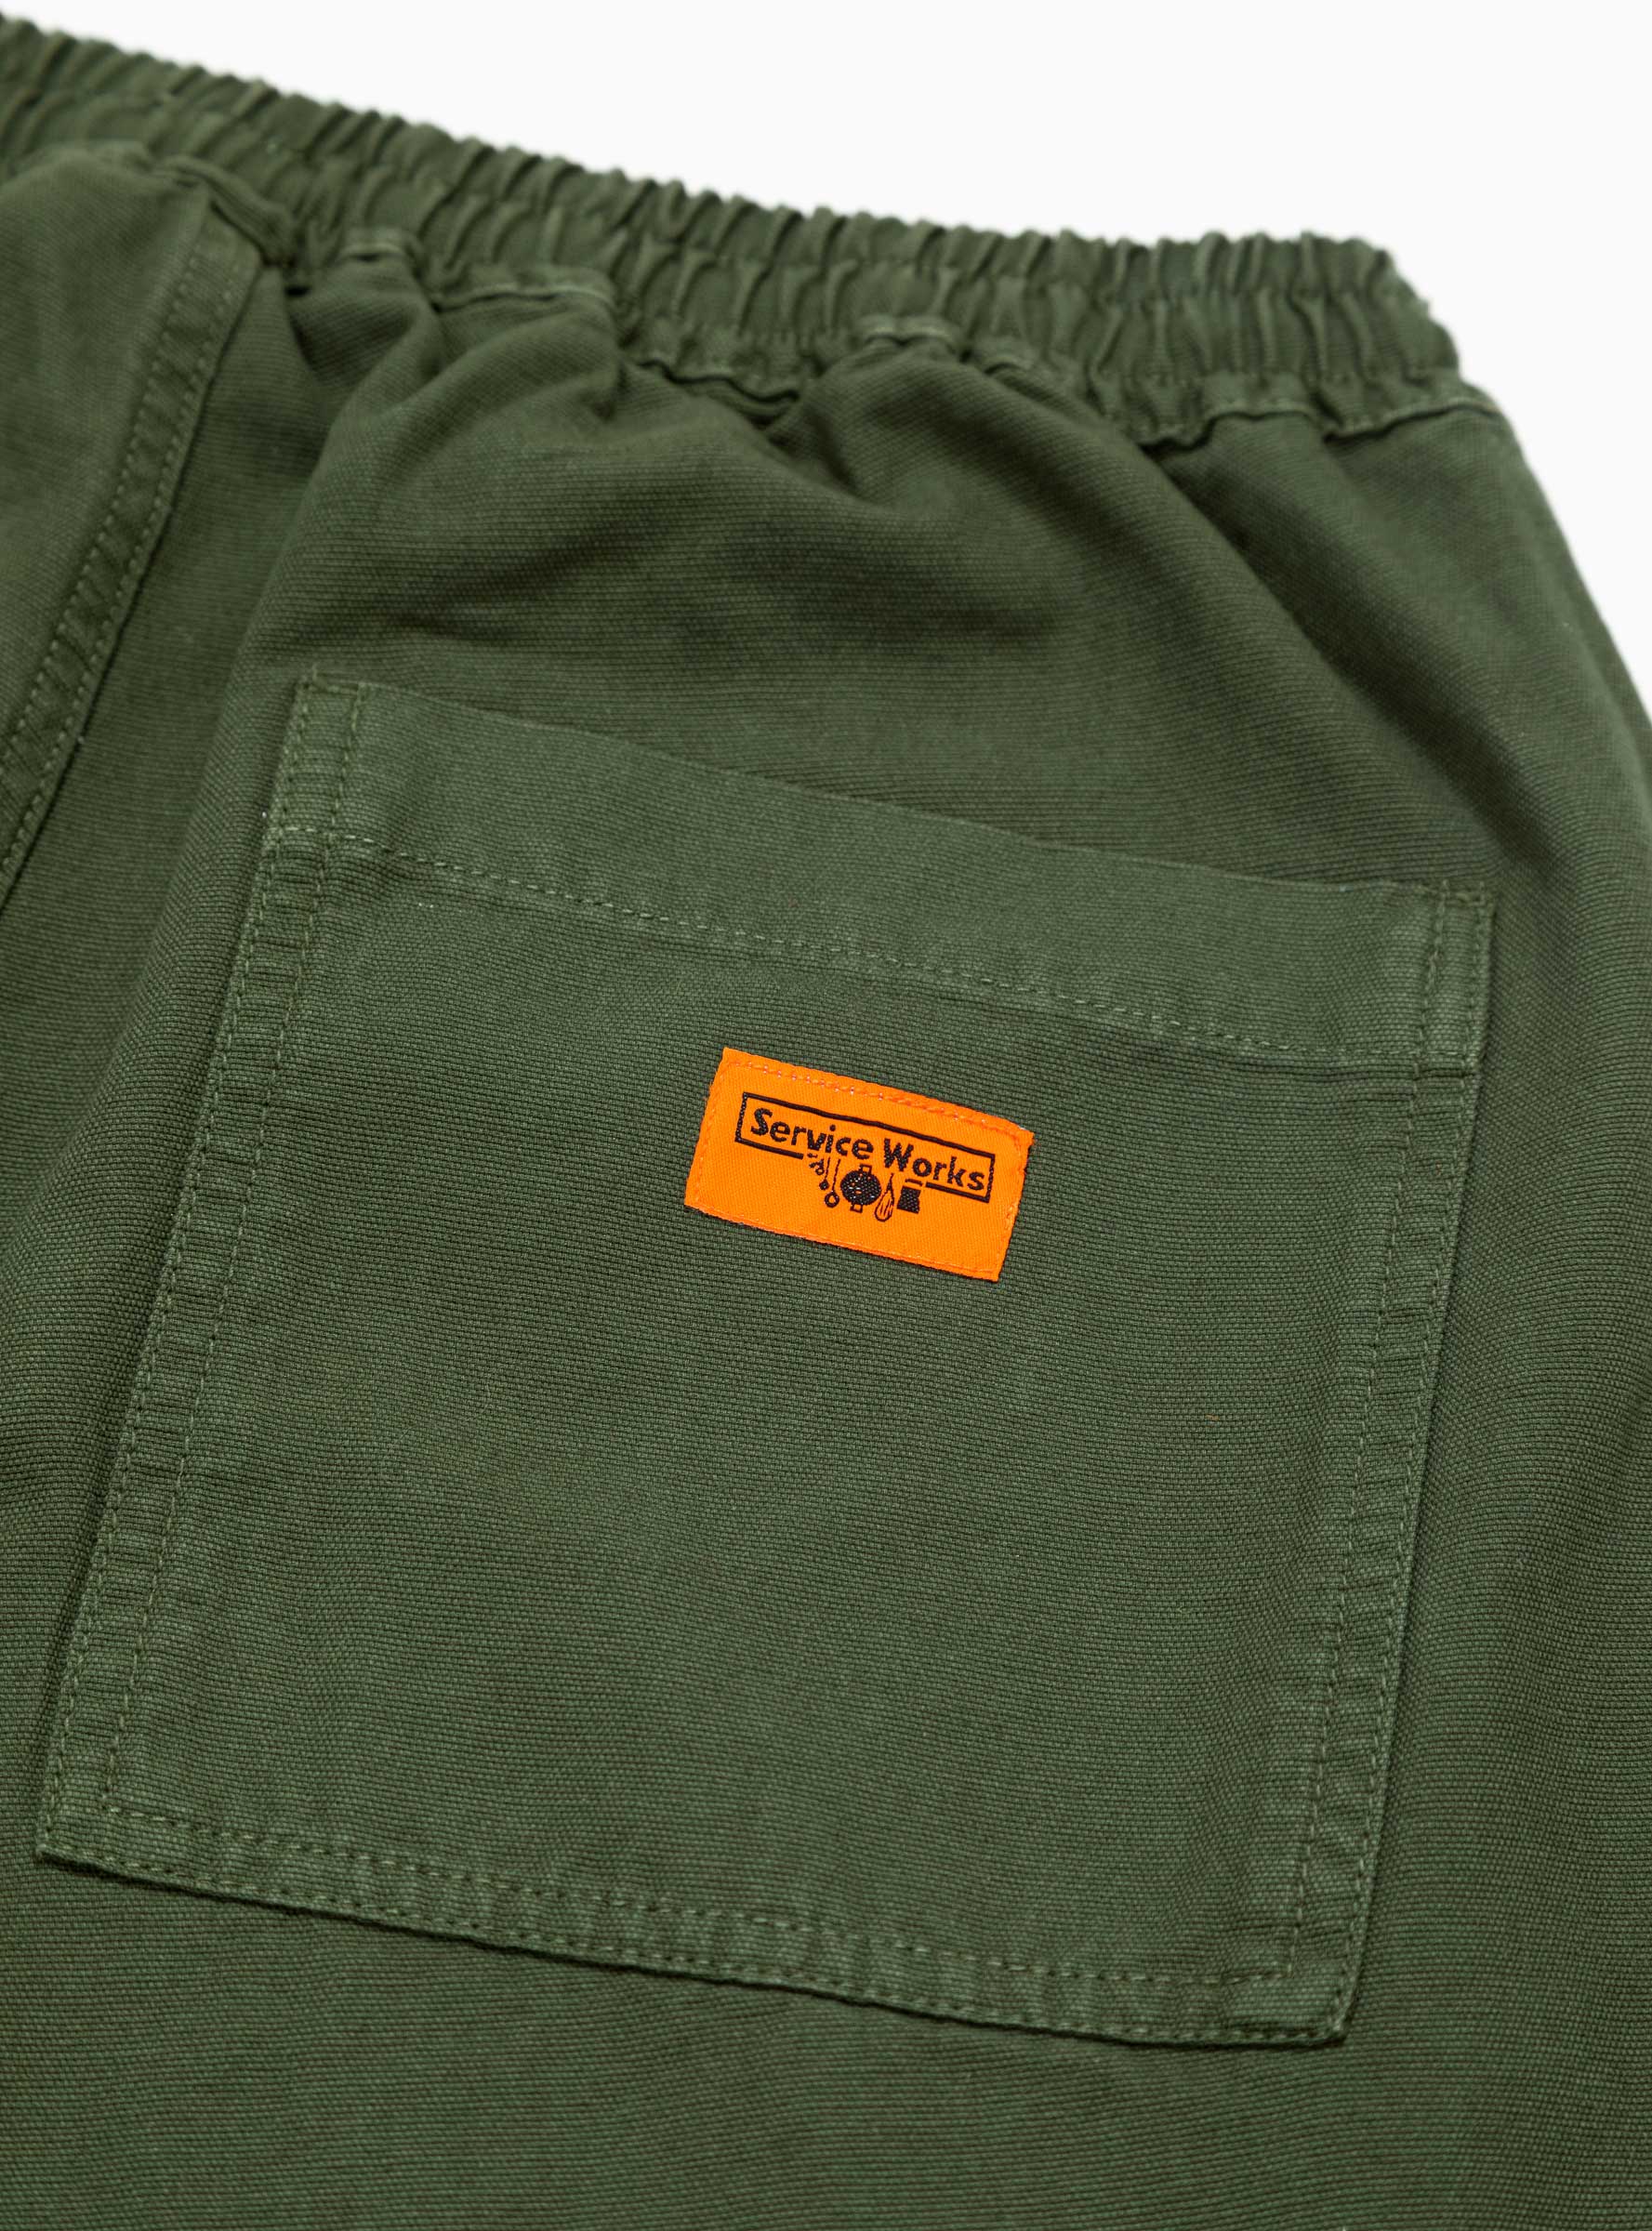 Service Works Service Works Classic Chef Trousers Olive - Size: Large